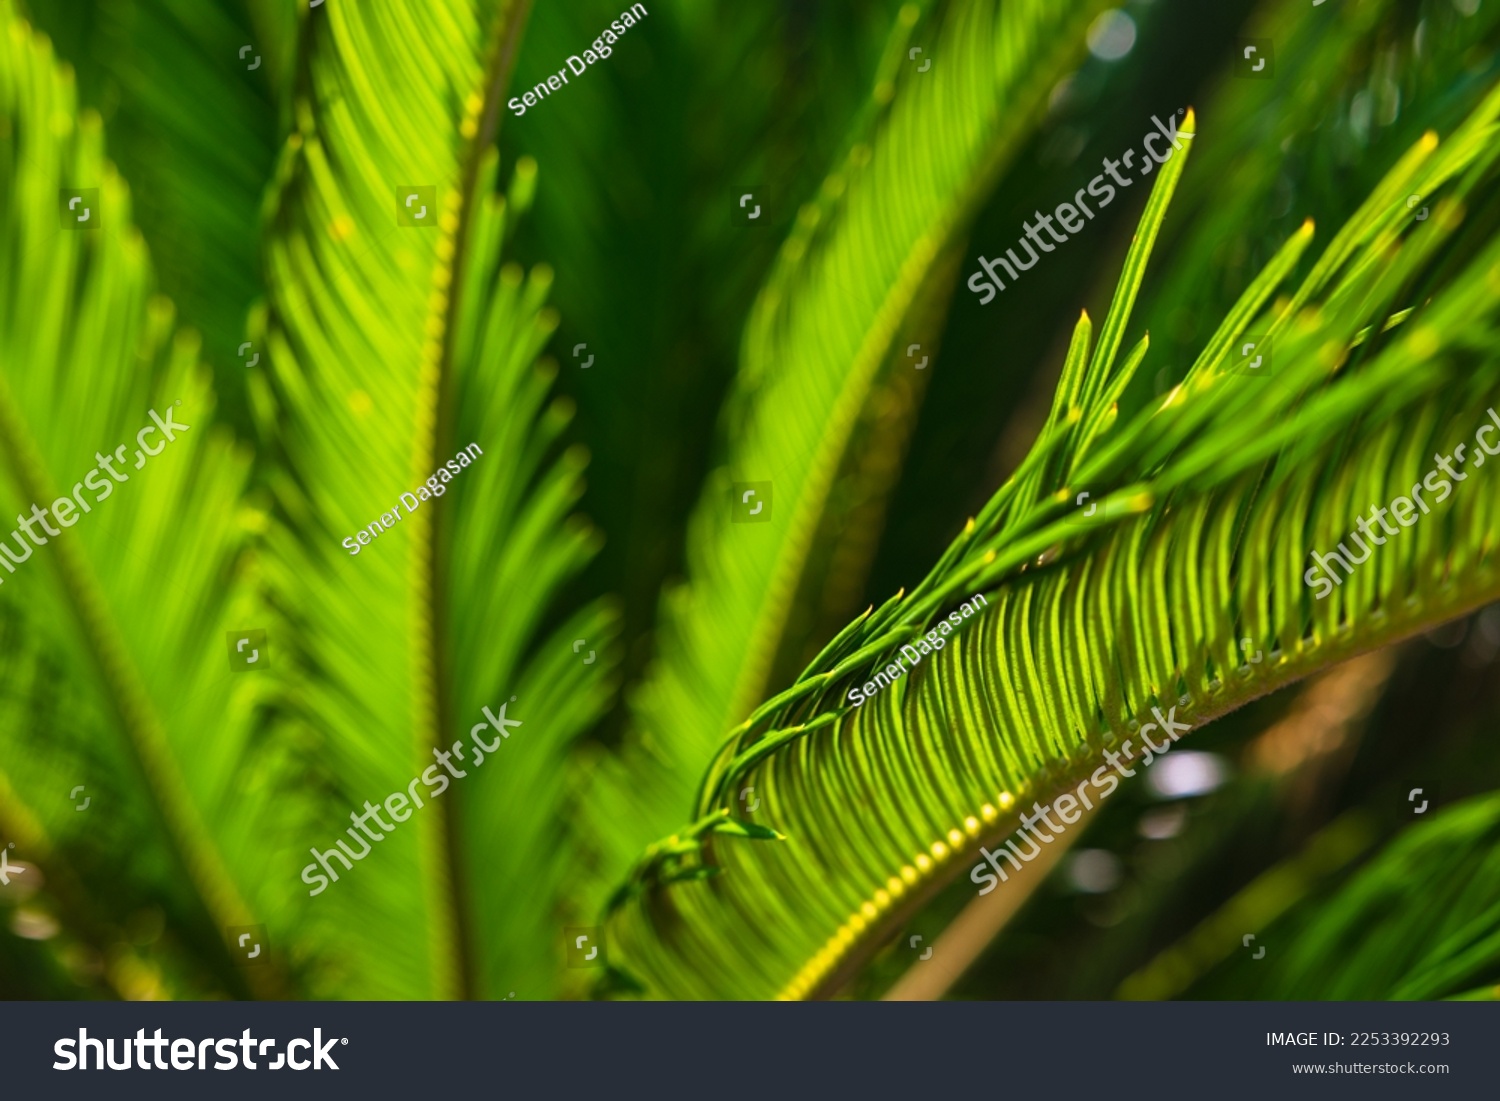 Sago palm or cycas revoluta leaves in focus. Decorative plants. Nature background. #2253392293